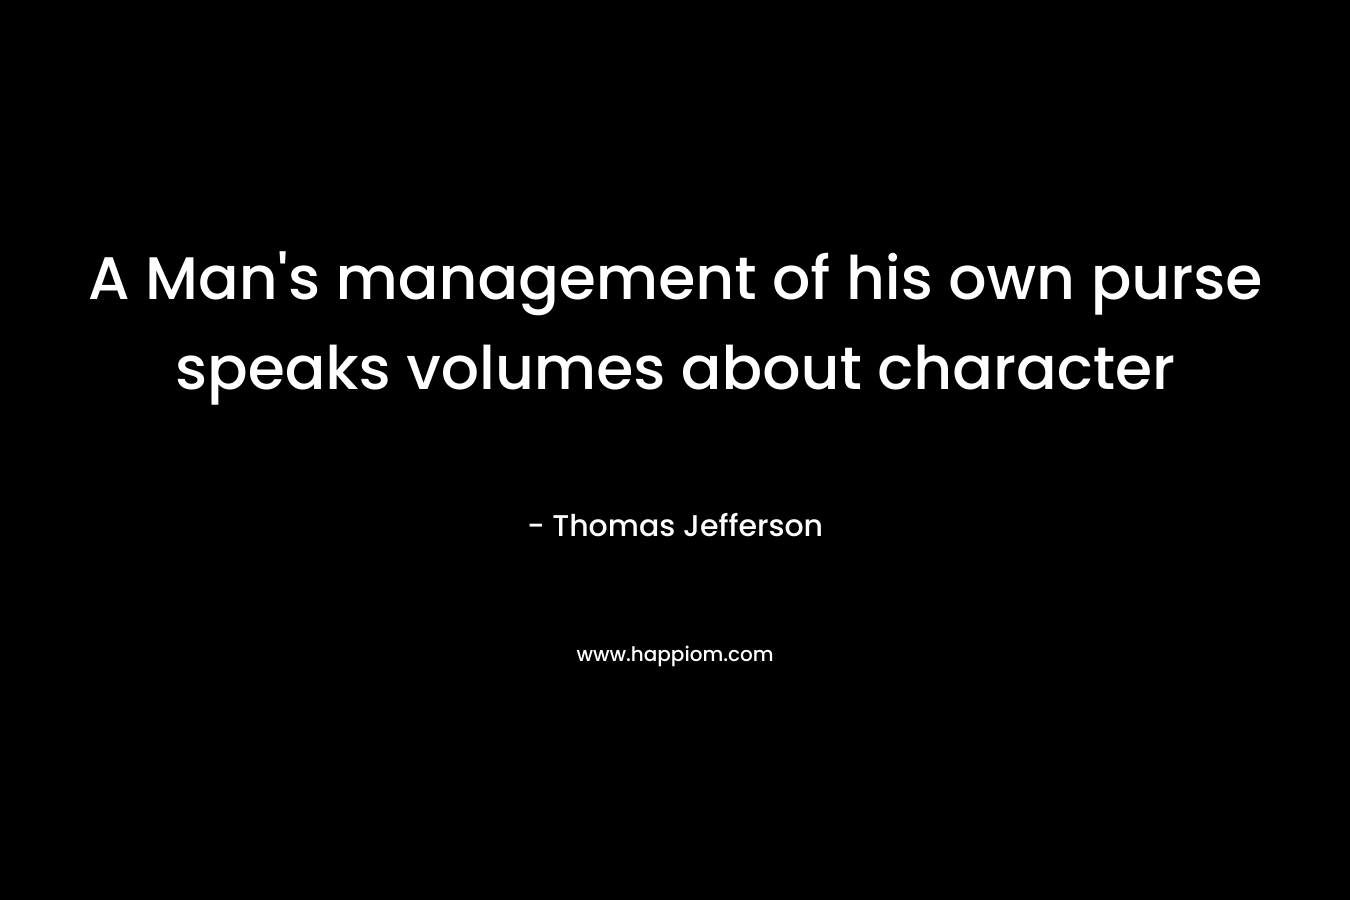 A Man's management of his own purse speaks volumes about character